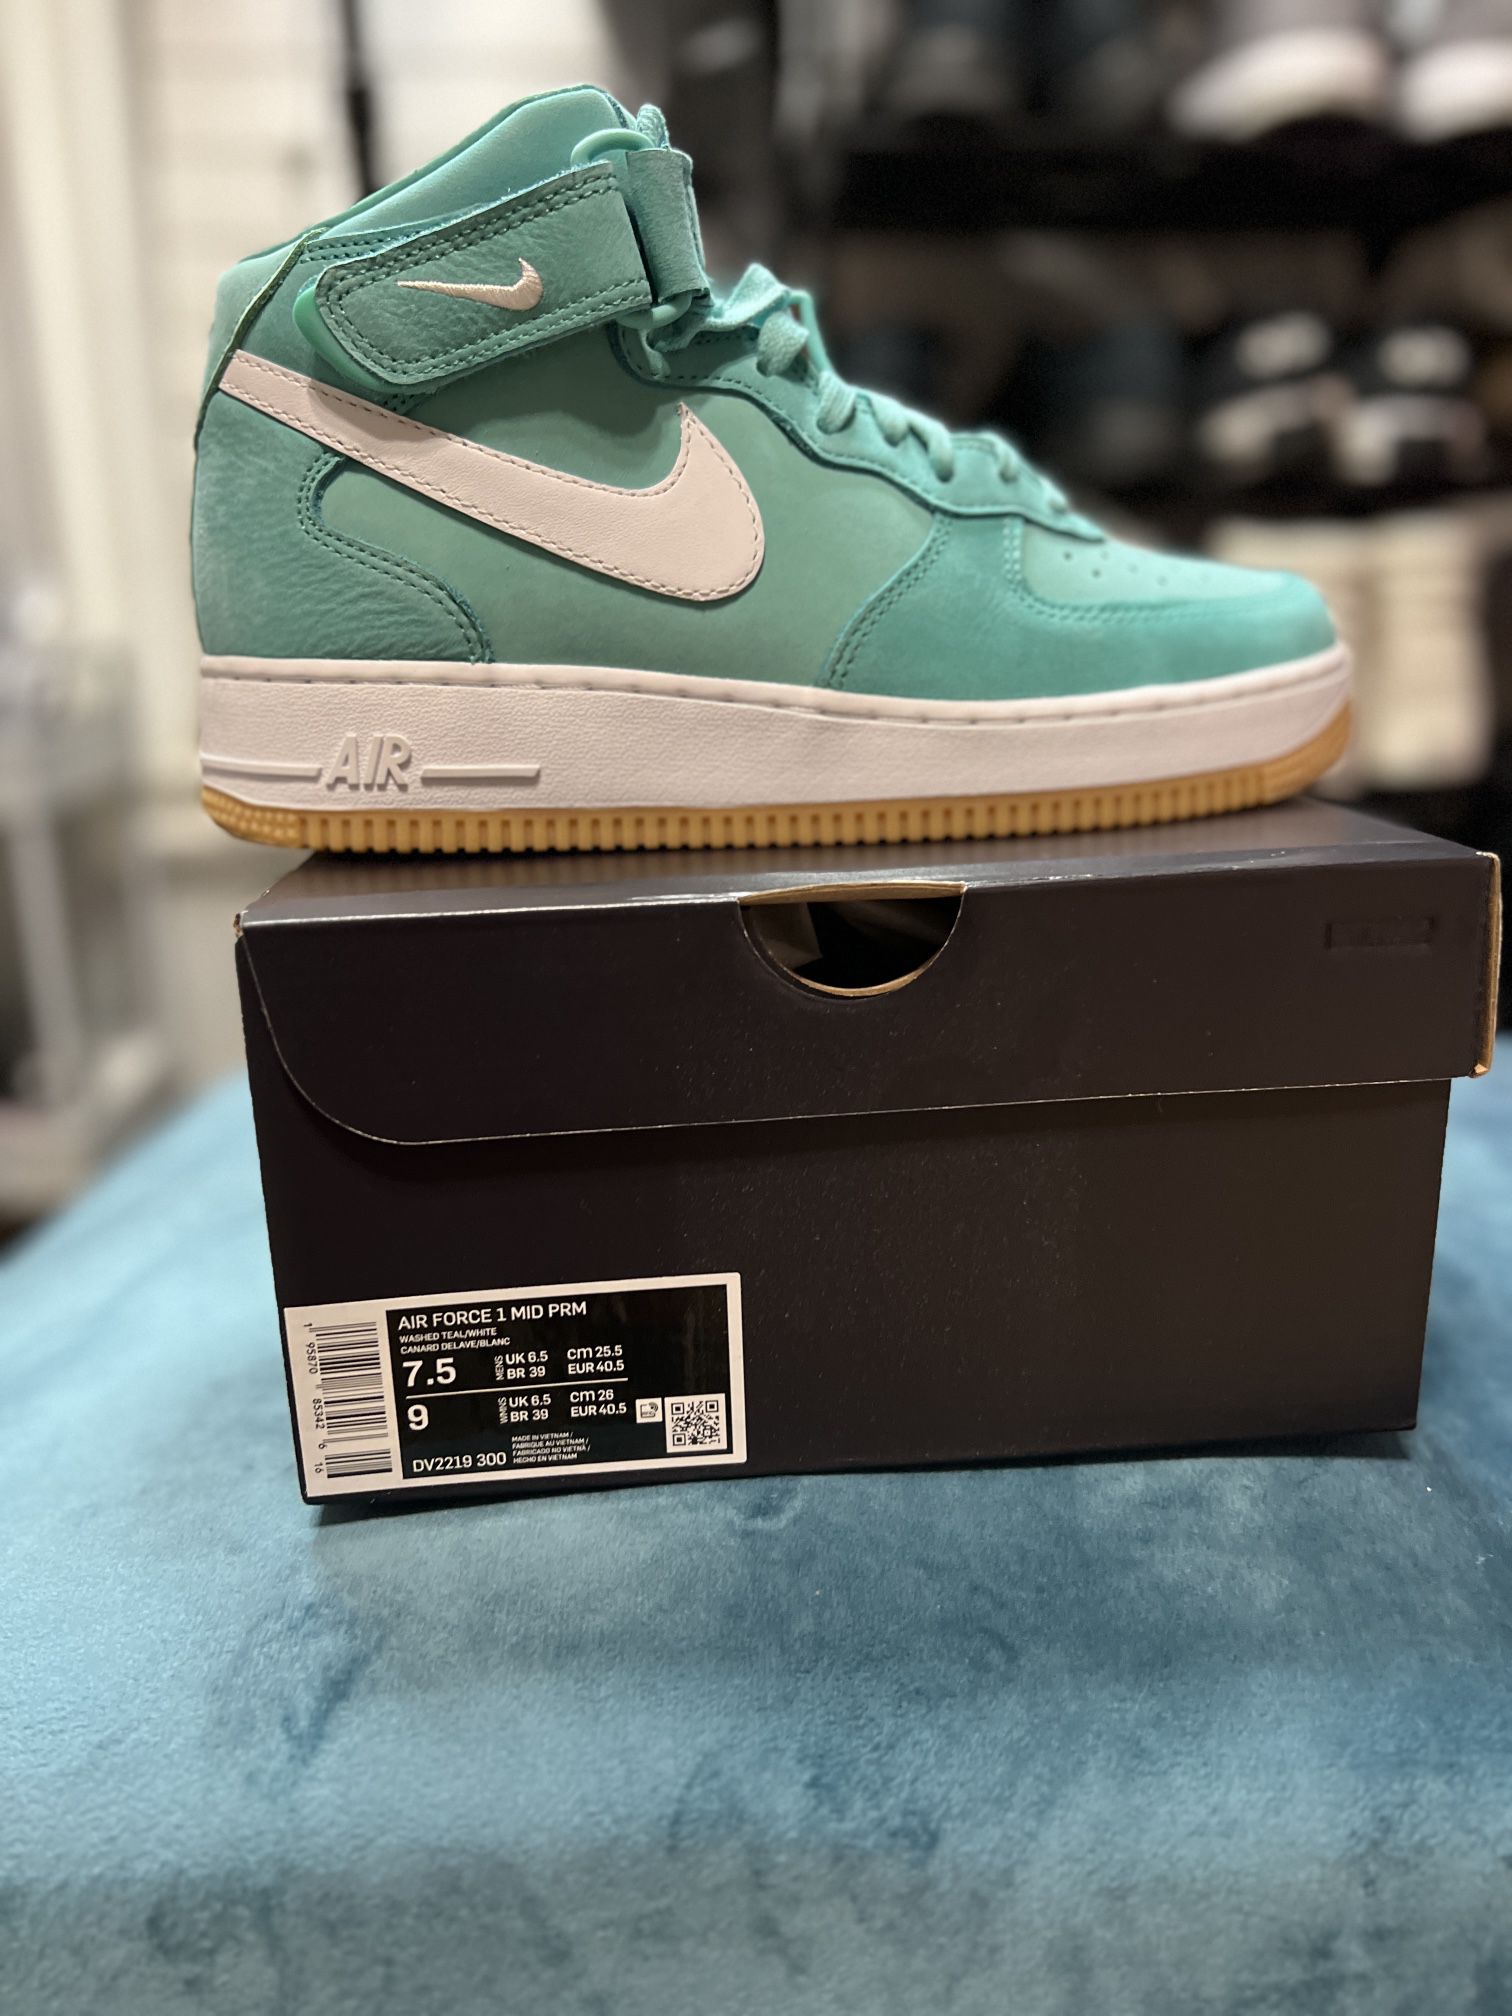 Nike Air Force 1 Mid Washed Teal DV2219-300 Release Info